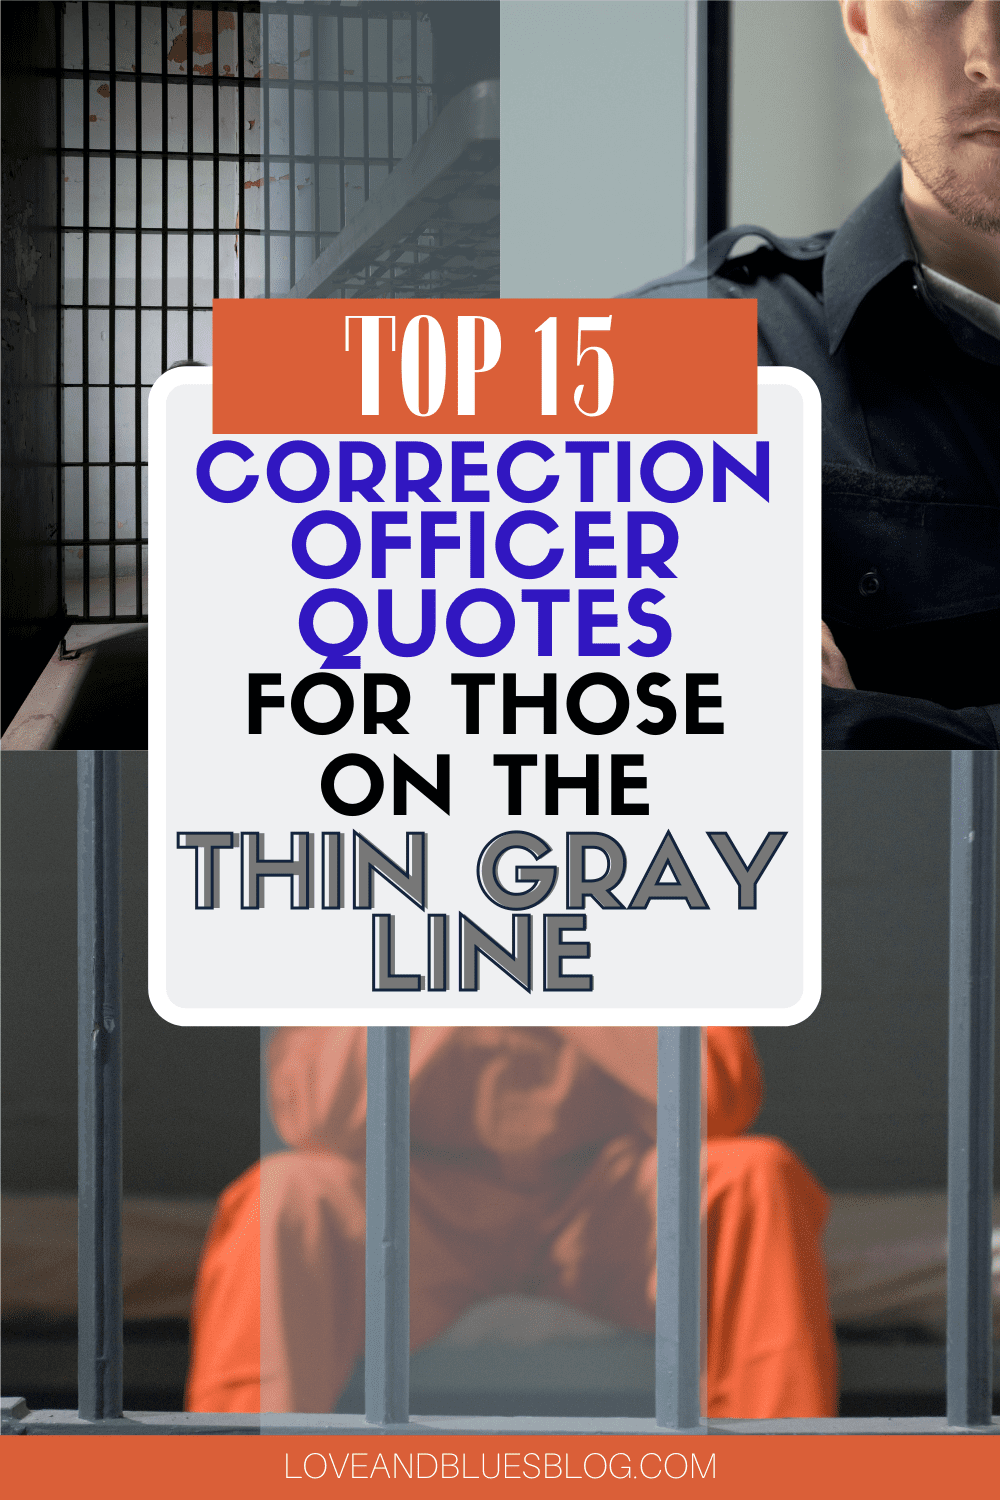 Great correction officer quotes! You don't find a lot of thin gray line support so this was awesome.